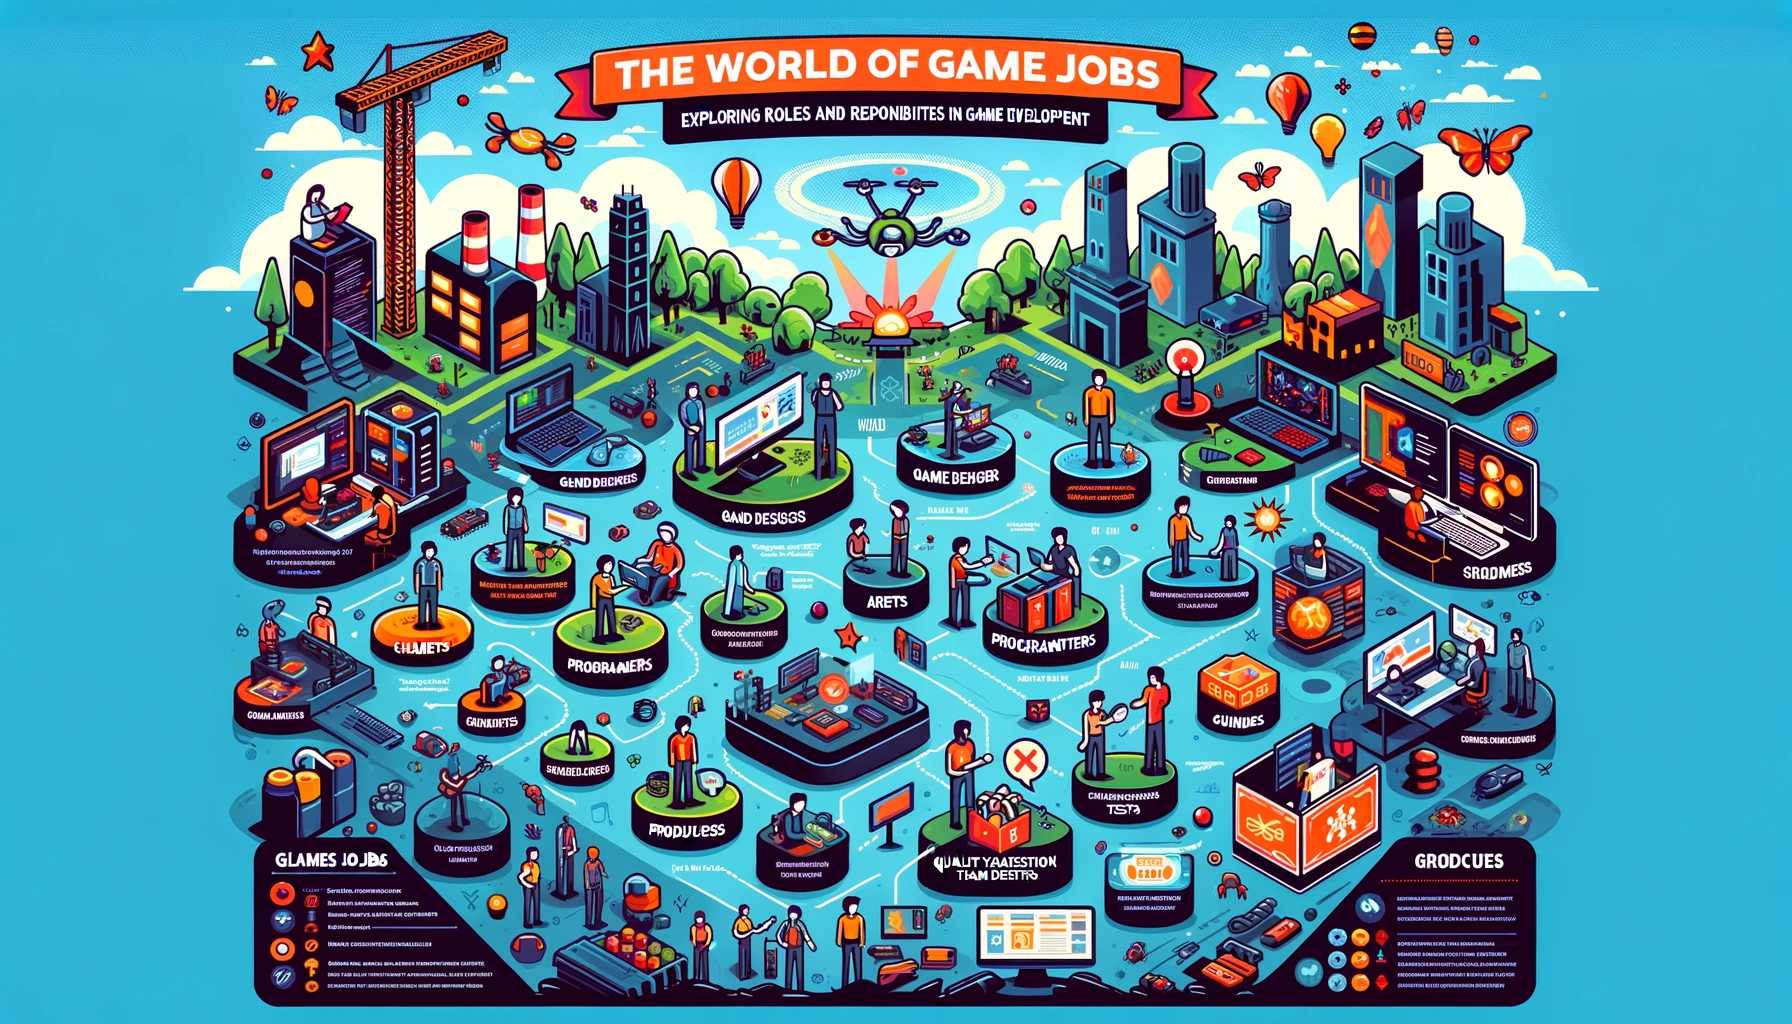 The World of Game Jobs: Exploring Roles and Responsibilities in Game Development